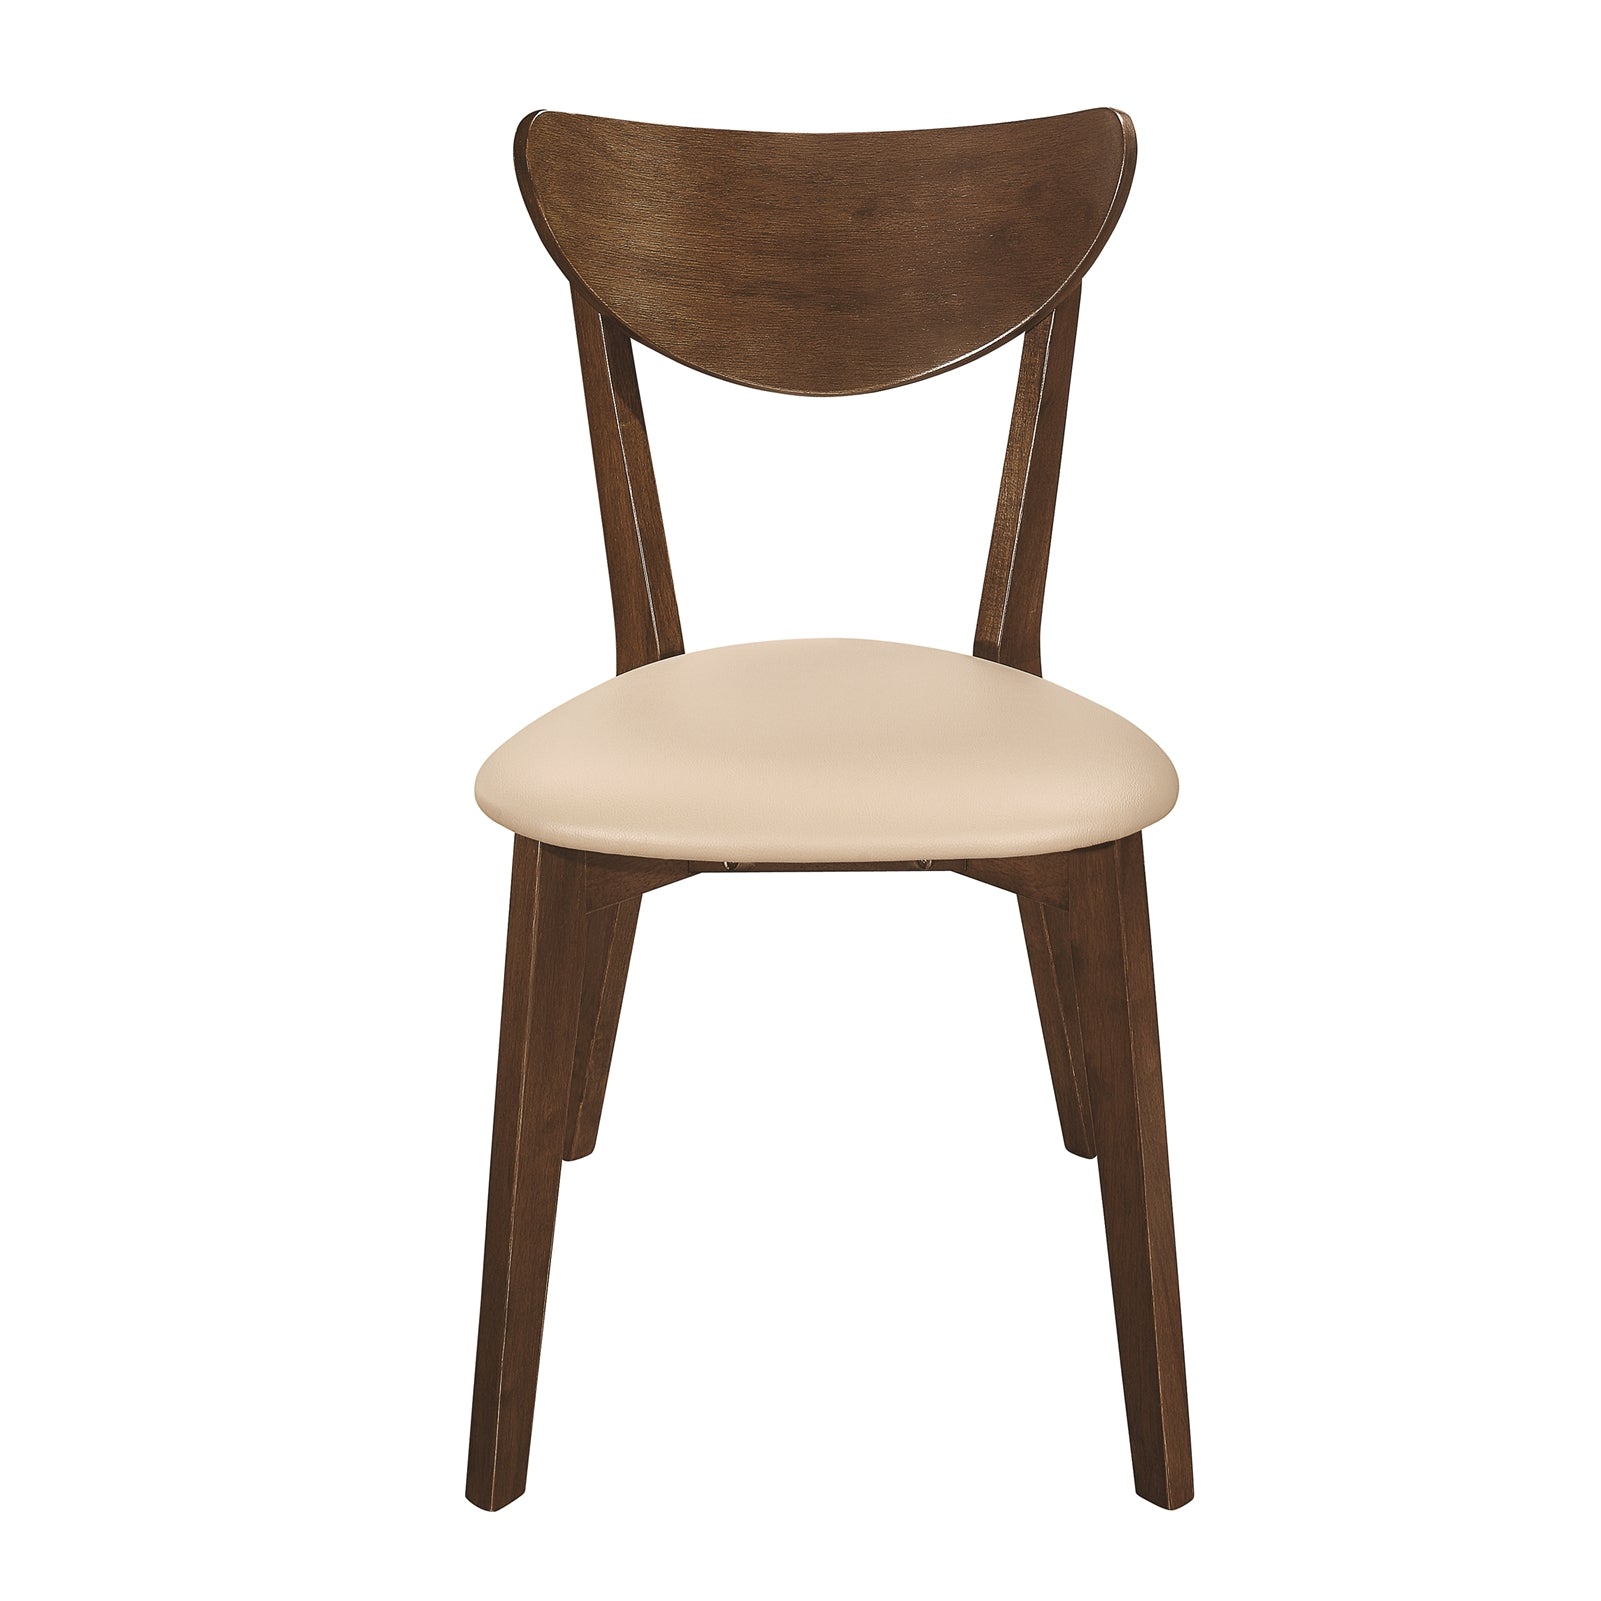 Kersey Chestnut Finish Side Chair Set of 2 Chairs